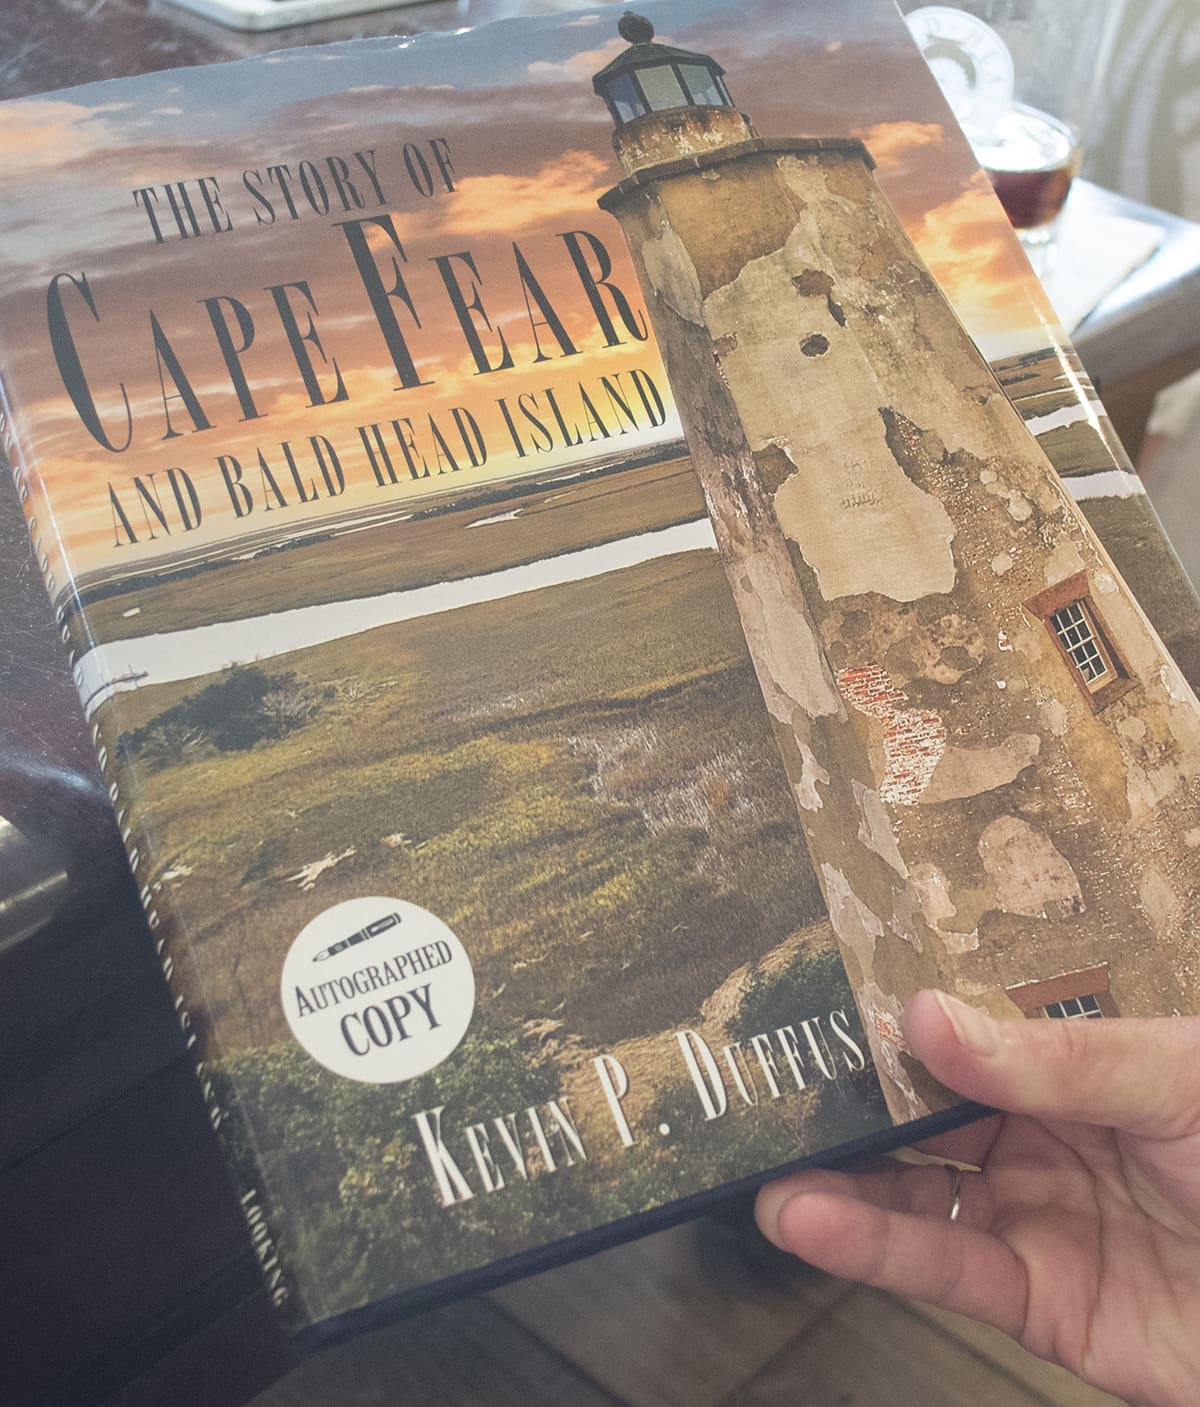 the story of cape fear and bald head island book cover